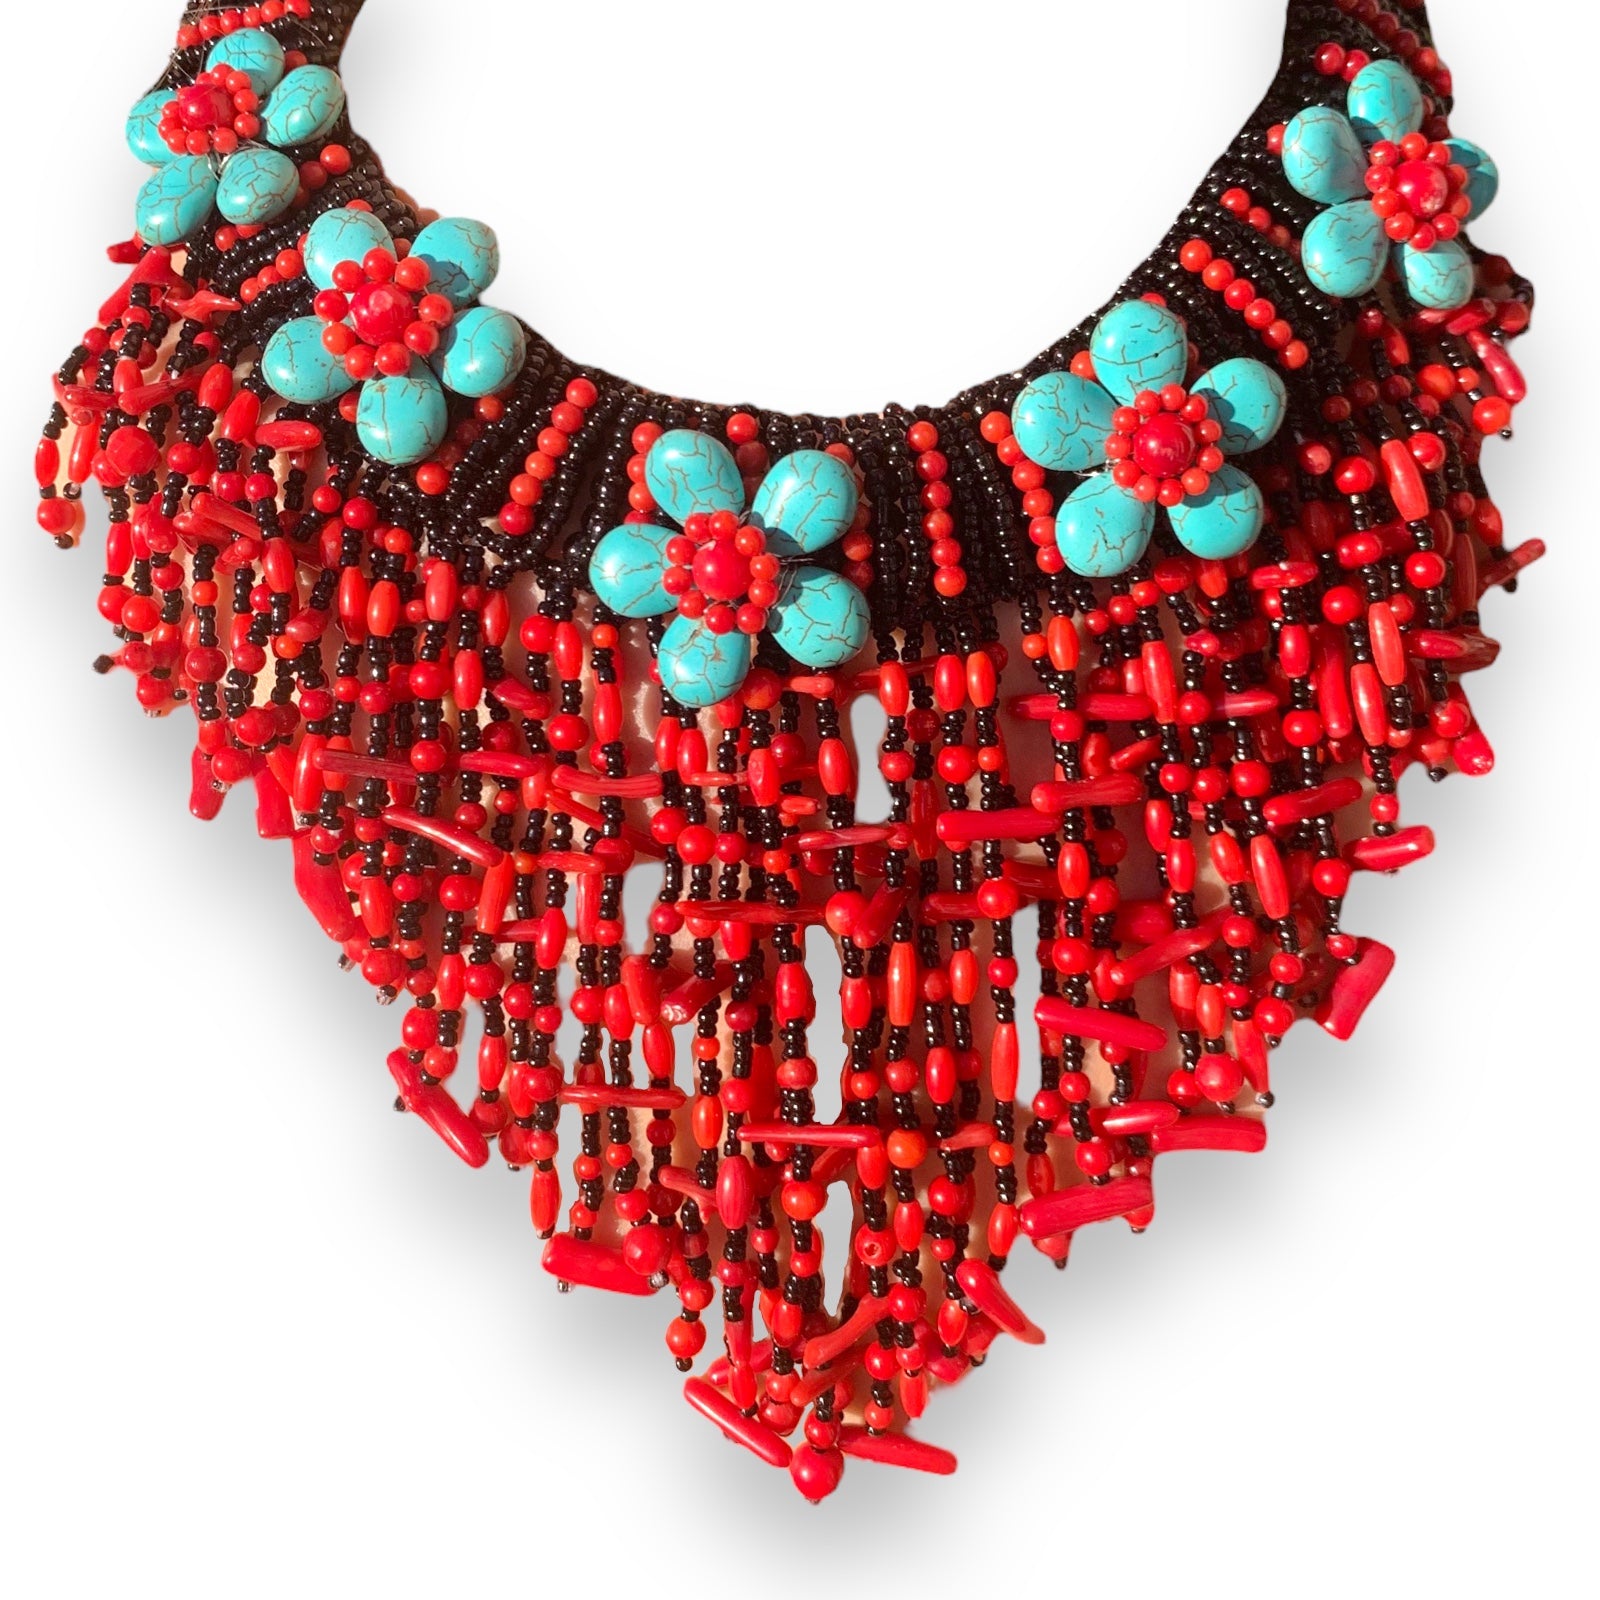 Handmade Drippy Branch Necklace 15" Waterfall Fringe Coral Turquoise Unique Jewelry